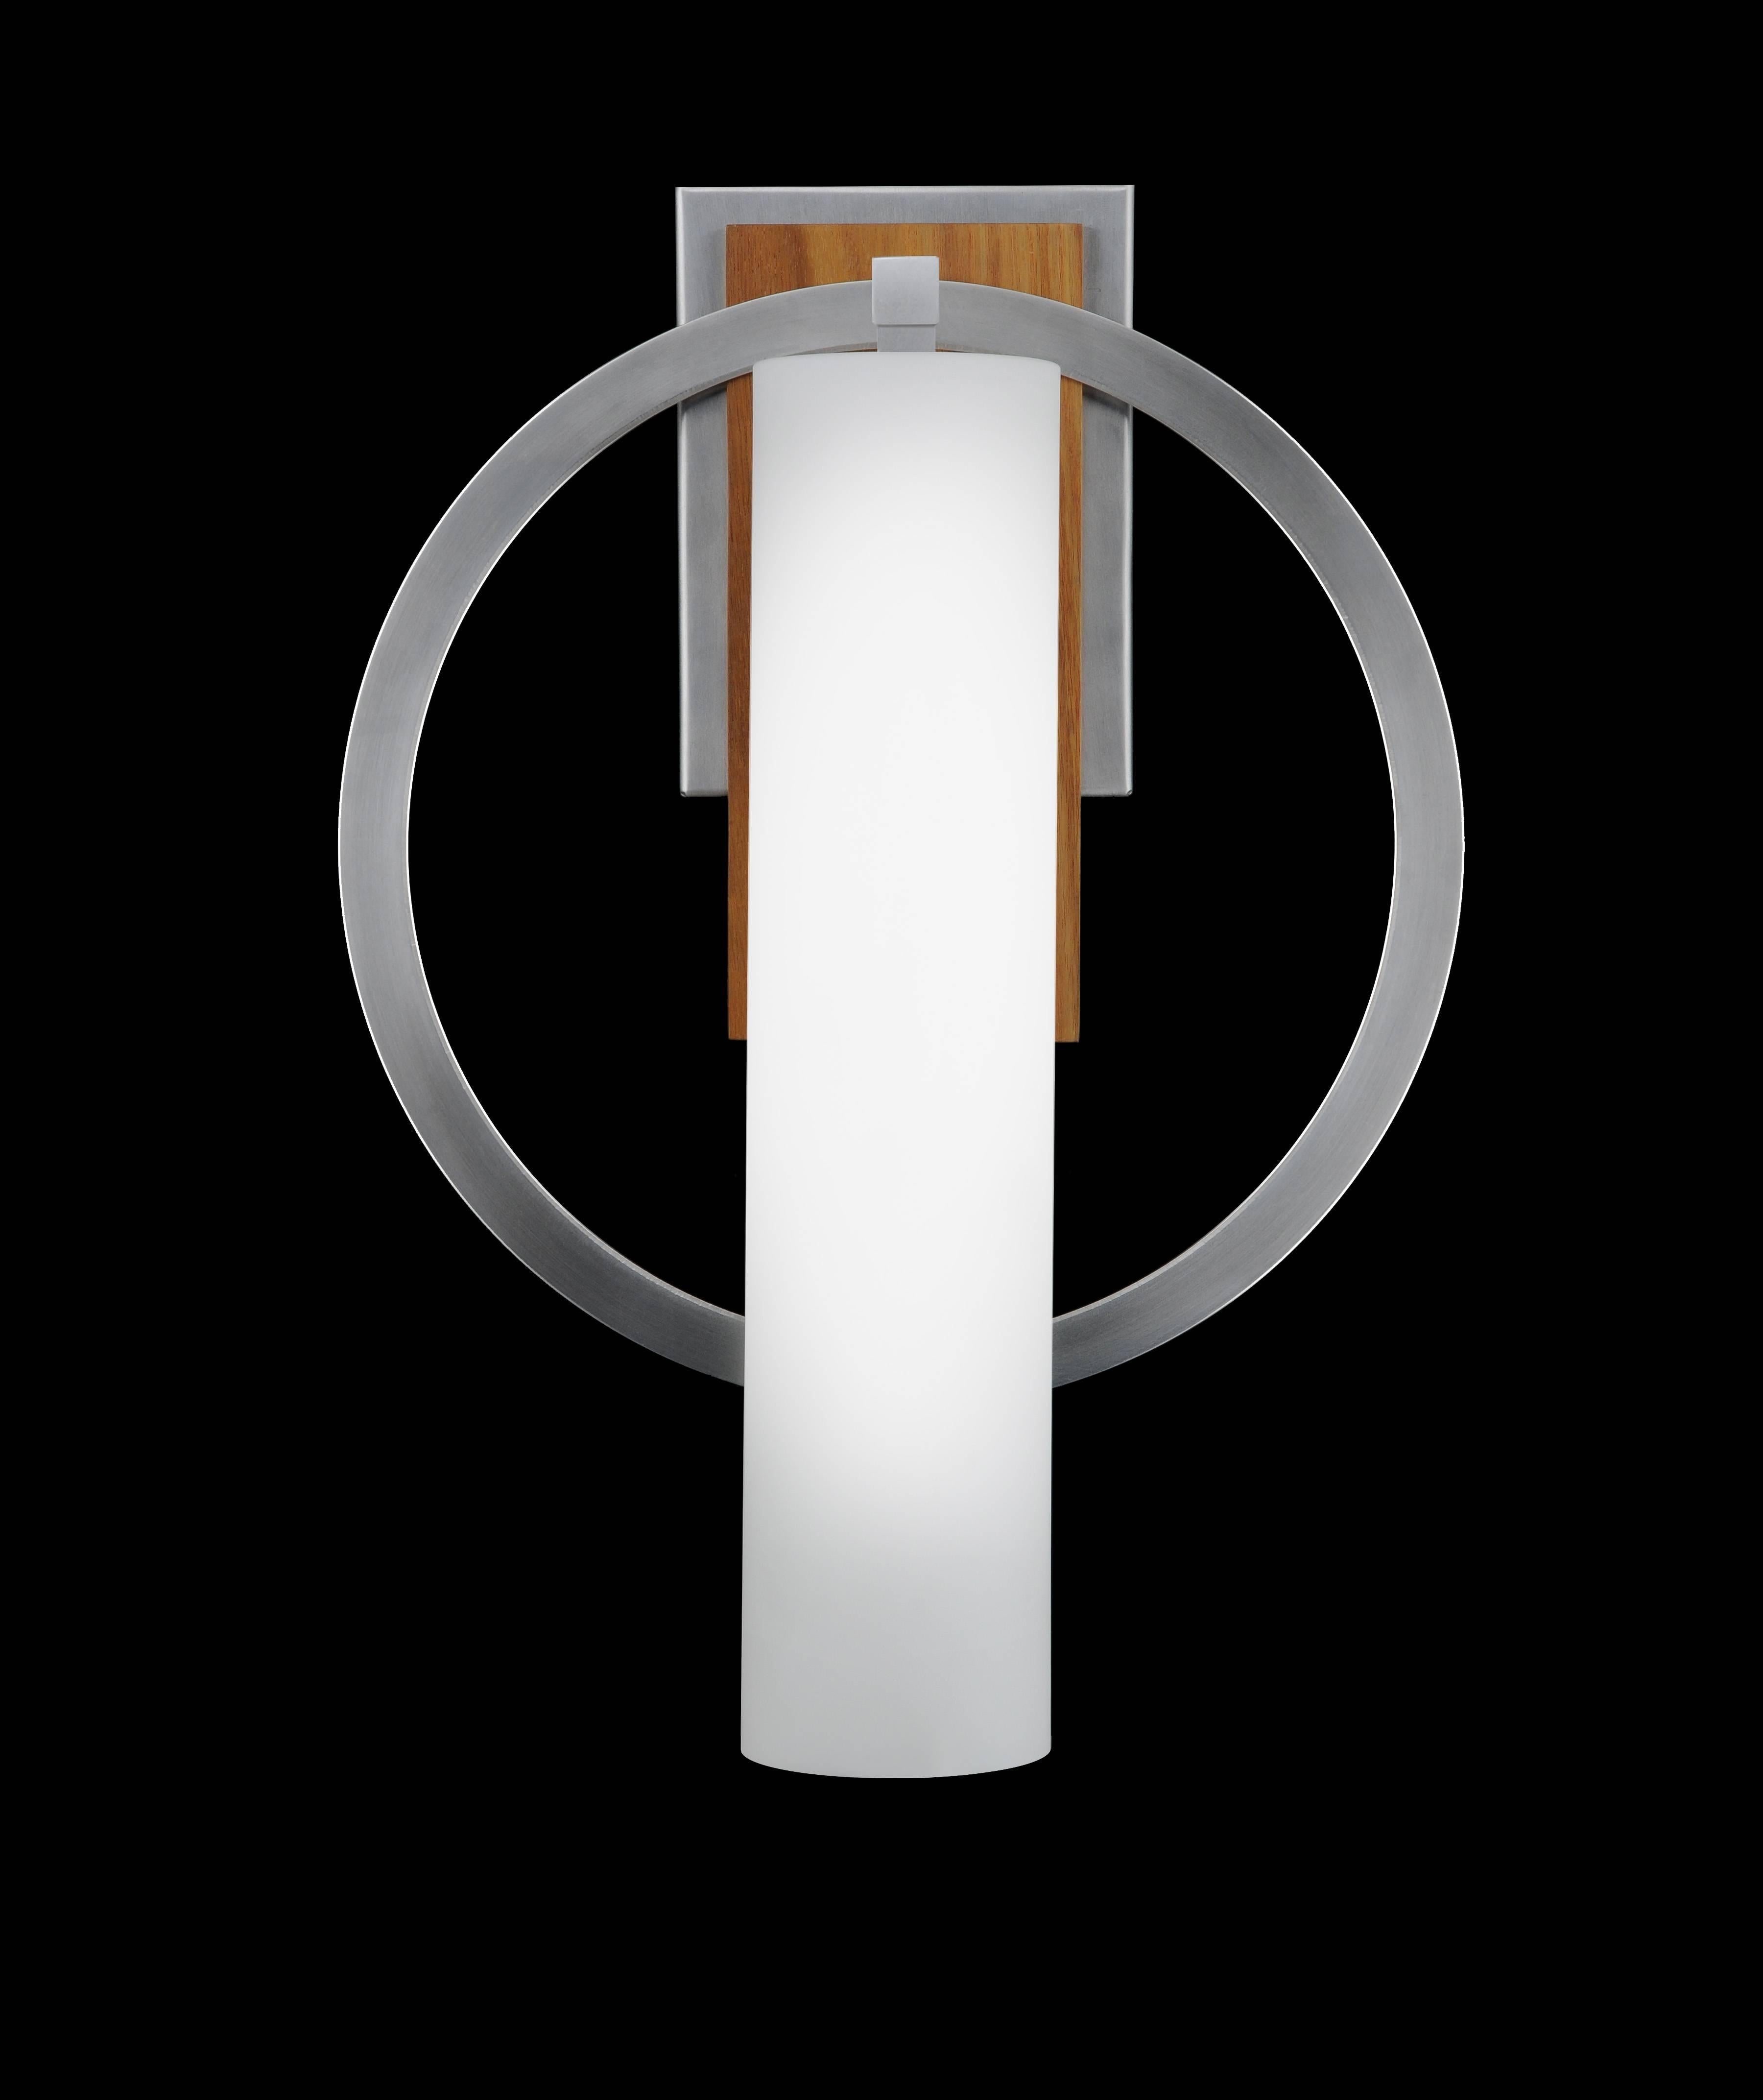 Cylinder shape sconce bisected with satin aluminum hoop with wood details.
Scandinavian Modern with a touch of arts and Crafts Design.

Architect, Sandy Littman of Duesenberg LTD.  and The American Glass Light Company have been making beautiful